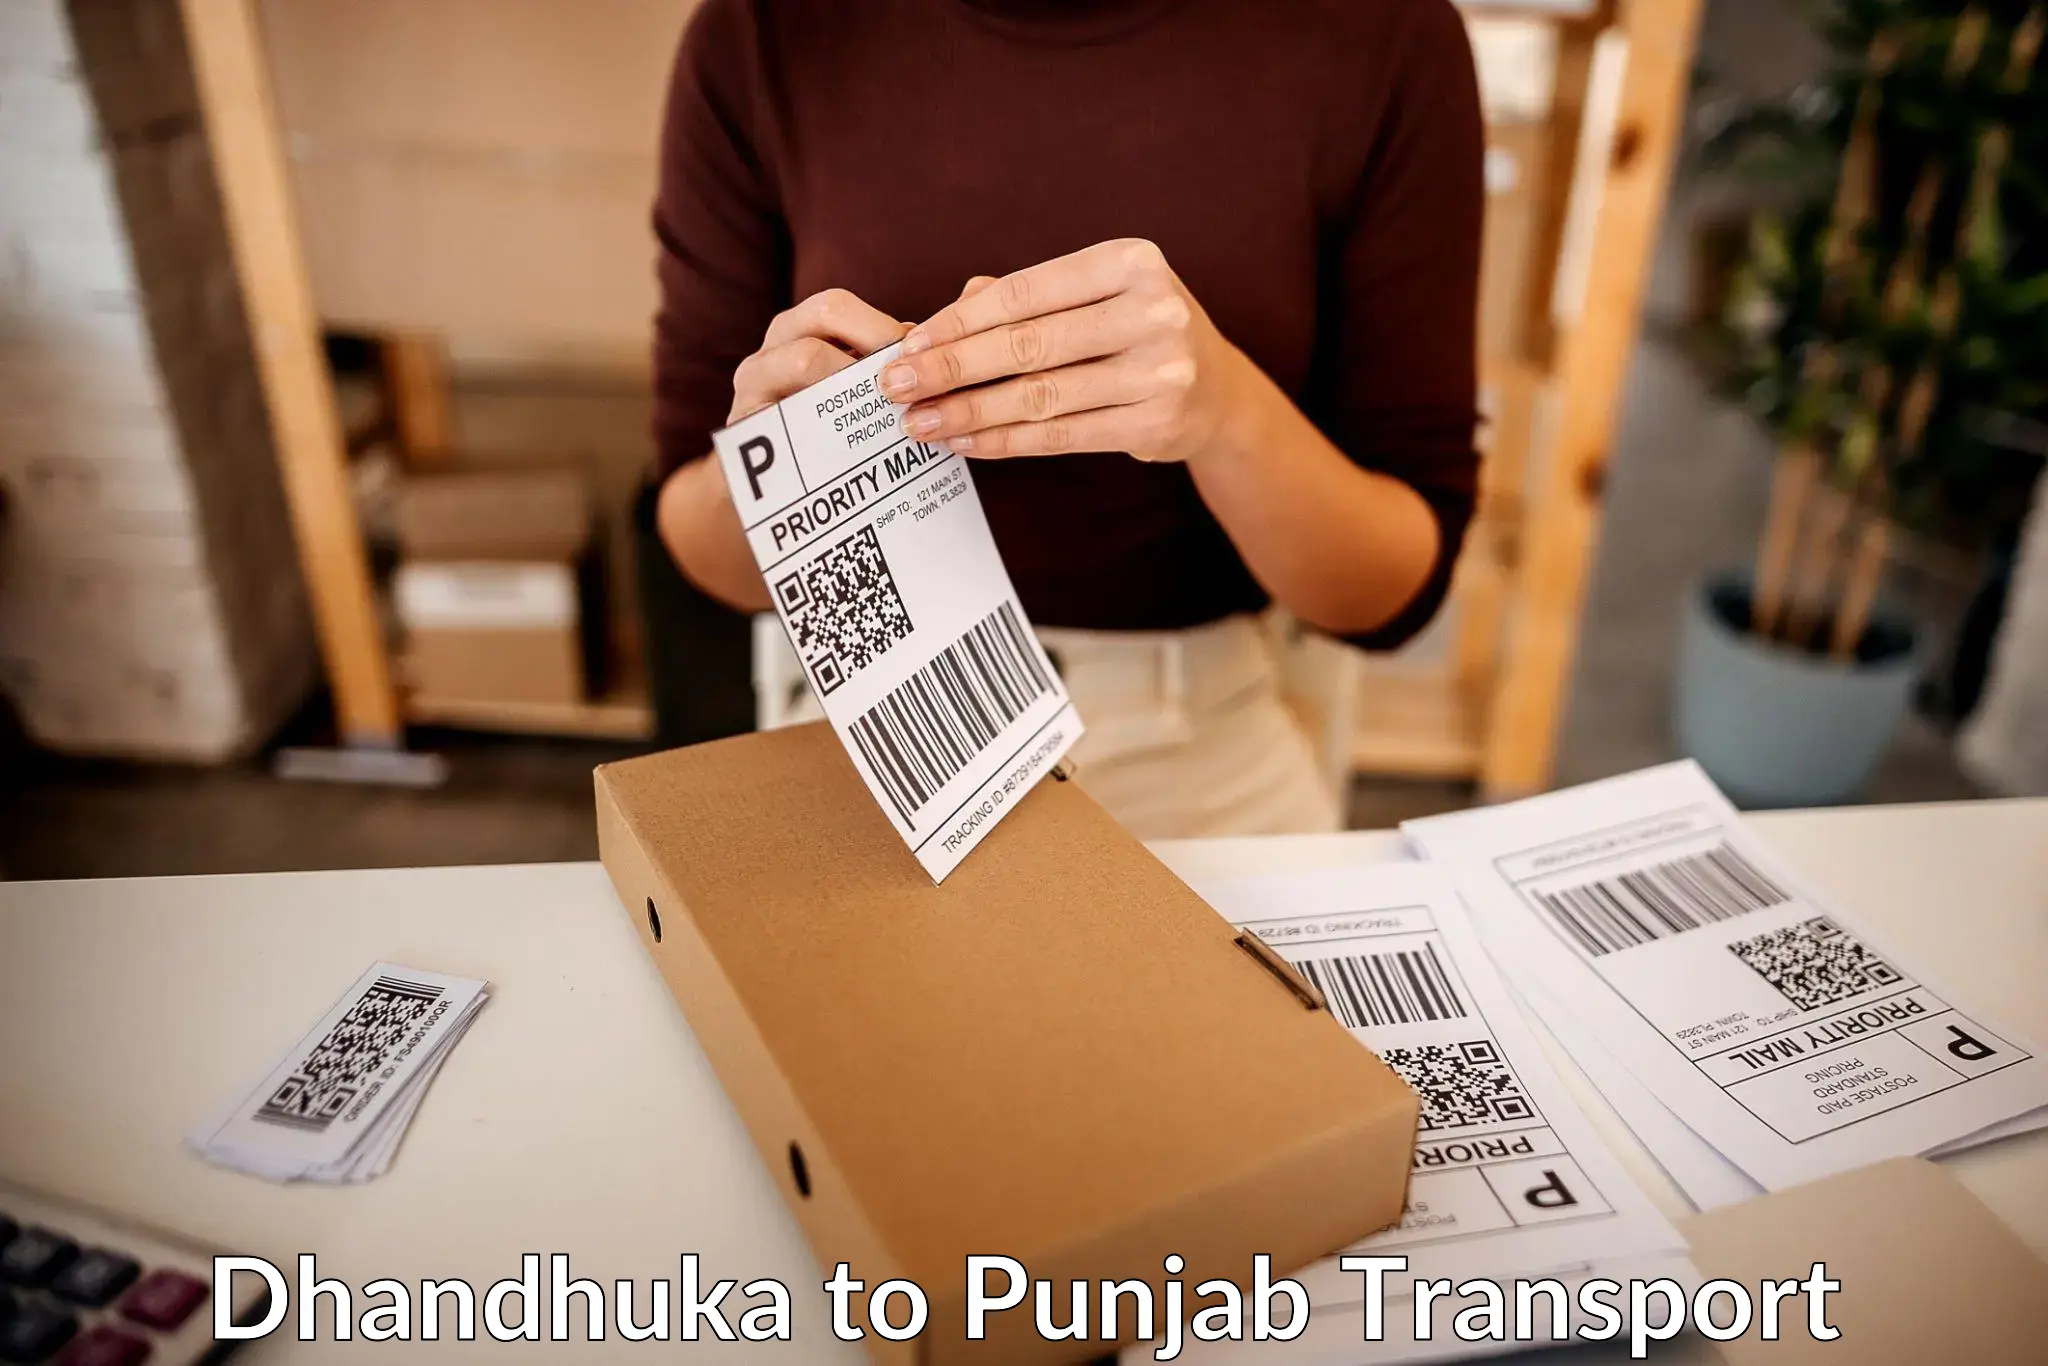 Daily transport service in Dhandhuka to Patiala